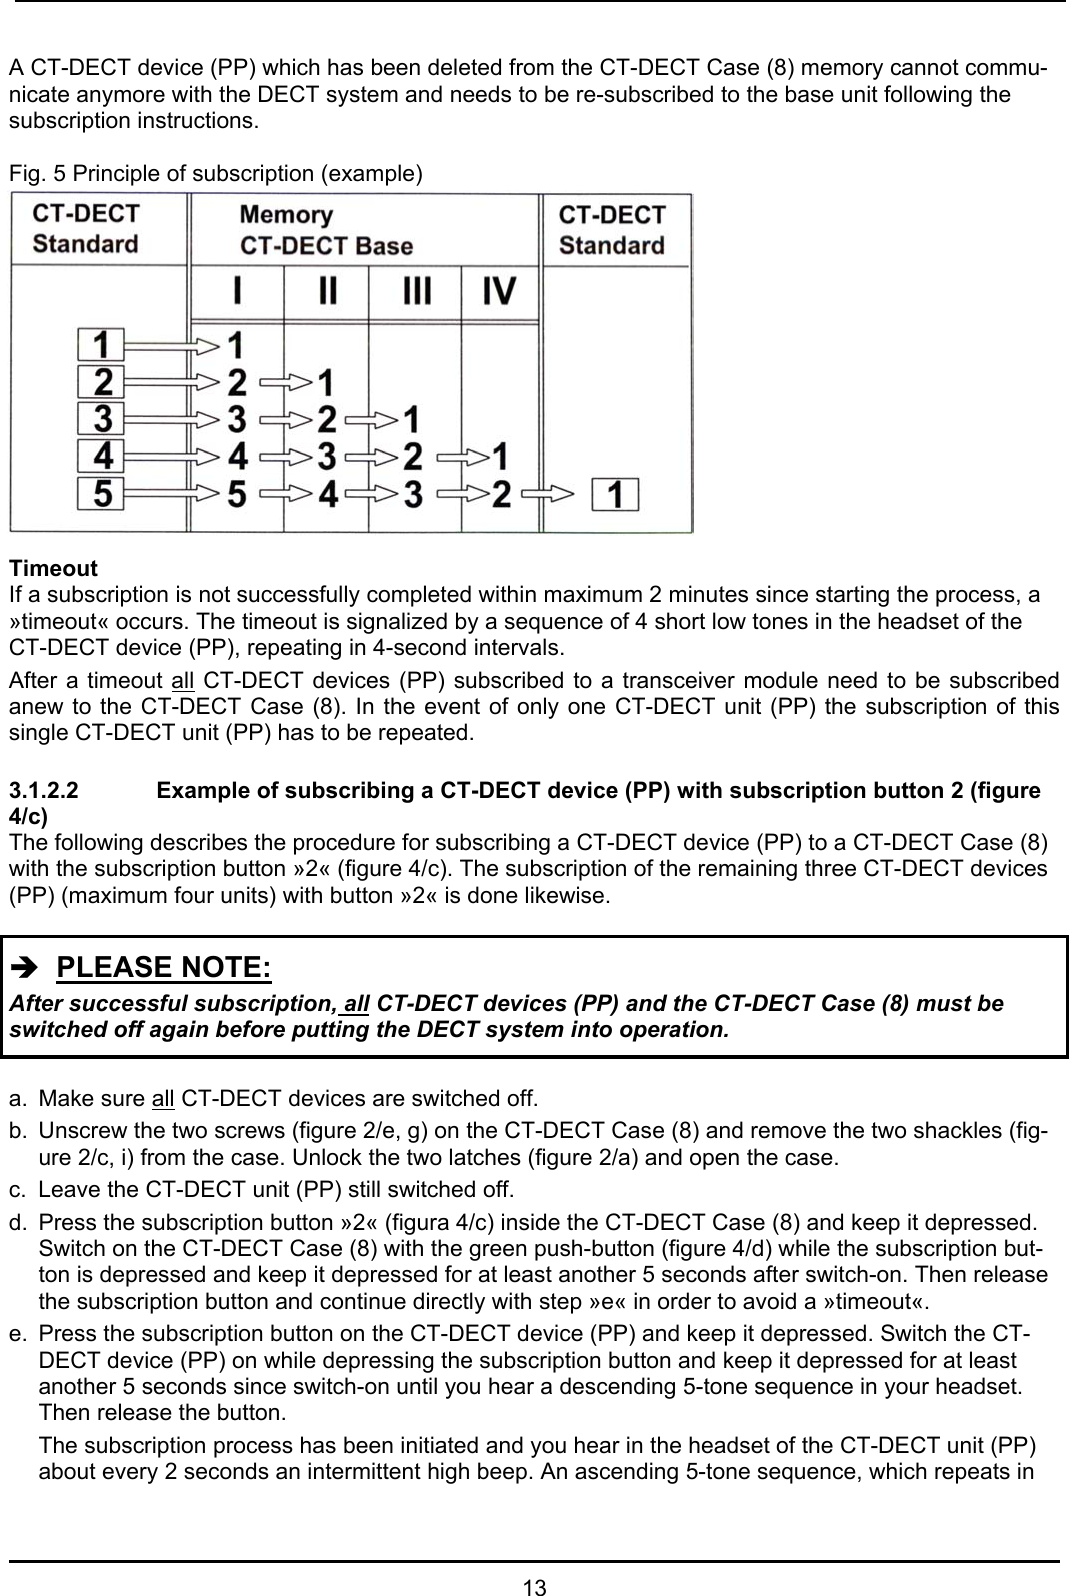   13 A CT-DECT device (PP) which has been deleted from the CT-DECT Case (8) memory cannot commu-nicate anymore with the DECT system and needs to be re-subscribed to the base unit following the subscription instructions.  Fig. 5 Principle of subscription (example)               Timeout If a subscription is not successfully completed within maximum 2 minutes since starting the process, a »timeout« occurs. The timeout is signalized by a sequence of 4 short low tones in the headset of the CT-DECT device (PP), repeating in 4-second intervals.  After a timeout all CT-DECT devices (PP) subscribed to a transceiver module need to be subscribed anew to the CT-DECT Case (8). In the event of only one CT-DECT unit (PP) the subscription of this single CT-DECT unit (PP) has to be repeated.   3.1.2.2   Example of subscribing a CT-DECT device (PP) with subscription button 2 (figure 4/c) The following describes the procedure for subscribing a CT-DECT device (PP) to a CT-DECT Case (8) with the subscription button »2« (figure 4/c). The subscription of the remaining three CT-DECT devices (PP) (maximum four units) with button »2« is done likewise.  Î  PLEASE NOTE: After successful subscription, all CT-DECT devices (PP) and the CT-DECT Case (8) must be switched off again before putting the DECT system into operation.   a.  Make sure all CT-DECT devices are switched off.  b.  Unscrew the two screws (figure 2/e, g) on the CT-DECT Case (8) and remove the two shackles (fig-ure 2/c, i) from the case. Unlock the two latches (figure 2/a) and open the case. c.  Leave the CT-DECT unit (PP) still switched off.  d.  Press the subscription button »2« (figura 4/c) inside the CT-DECT Case (8) and keep it depressed. Switch on the CT-DECT Case (8) with the green push-button (figure 4/d) while the subscription but-ton is depressed and keep it depressed for at least another 5 seconds after switch-on. Then release the subscription button and continue directly with step »e« in order to avoid a »timeout«. e.  Press the subscription button on the CT-DECT device (PP) and keep it depressed. Switch the CT-DECT device (PP) on while depressing the subscription button and keep it depressed for at least another 5 seconds since switch-on until you hear a descending 5-tone sequence in your headset. Then release the button.  The subscription process has been initiated and you hear in the headset of the CT-DECT unit (PP) about every 2 seconds an intermittent high beep. An ascending 5-tone sequence, which repeats in 